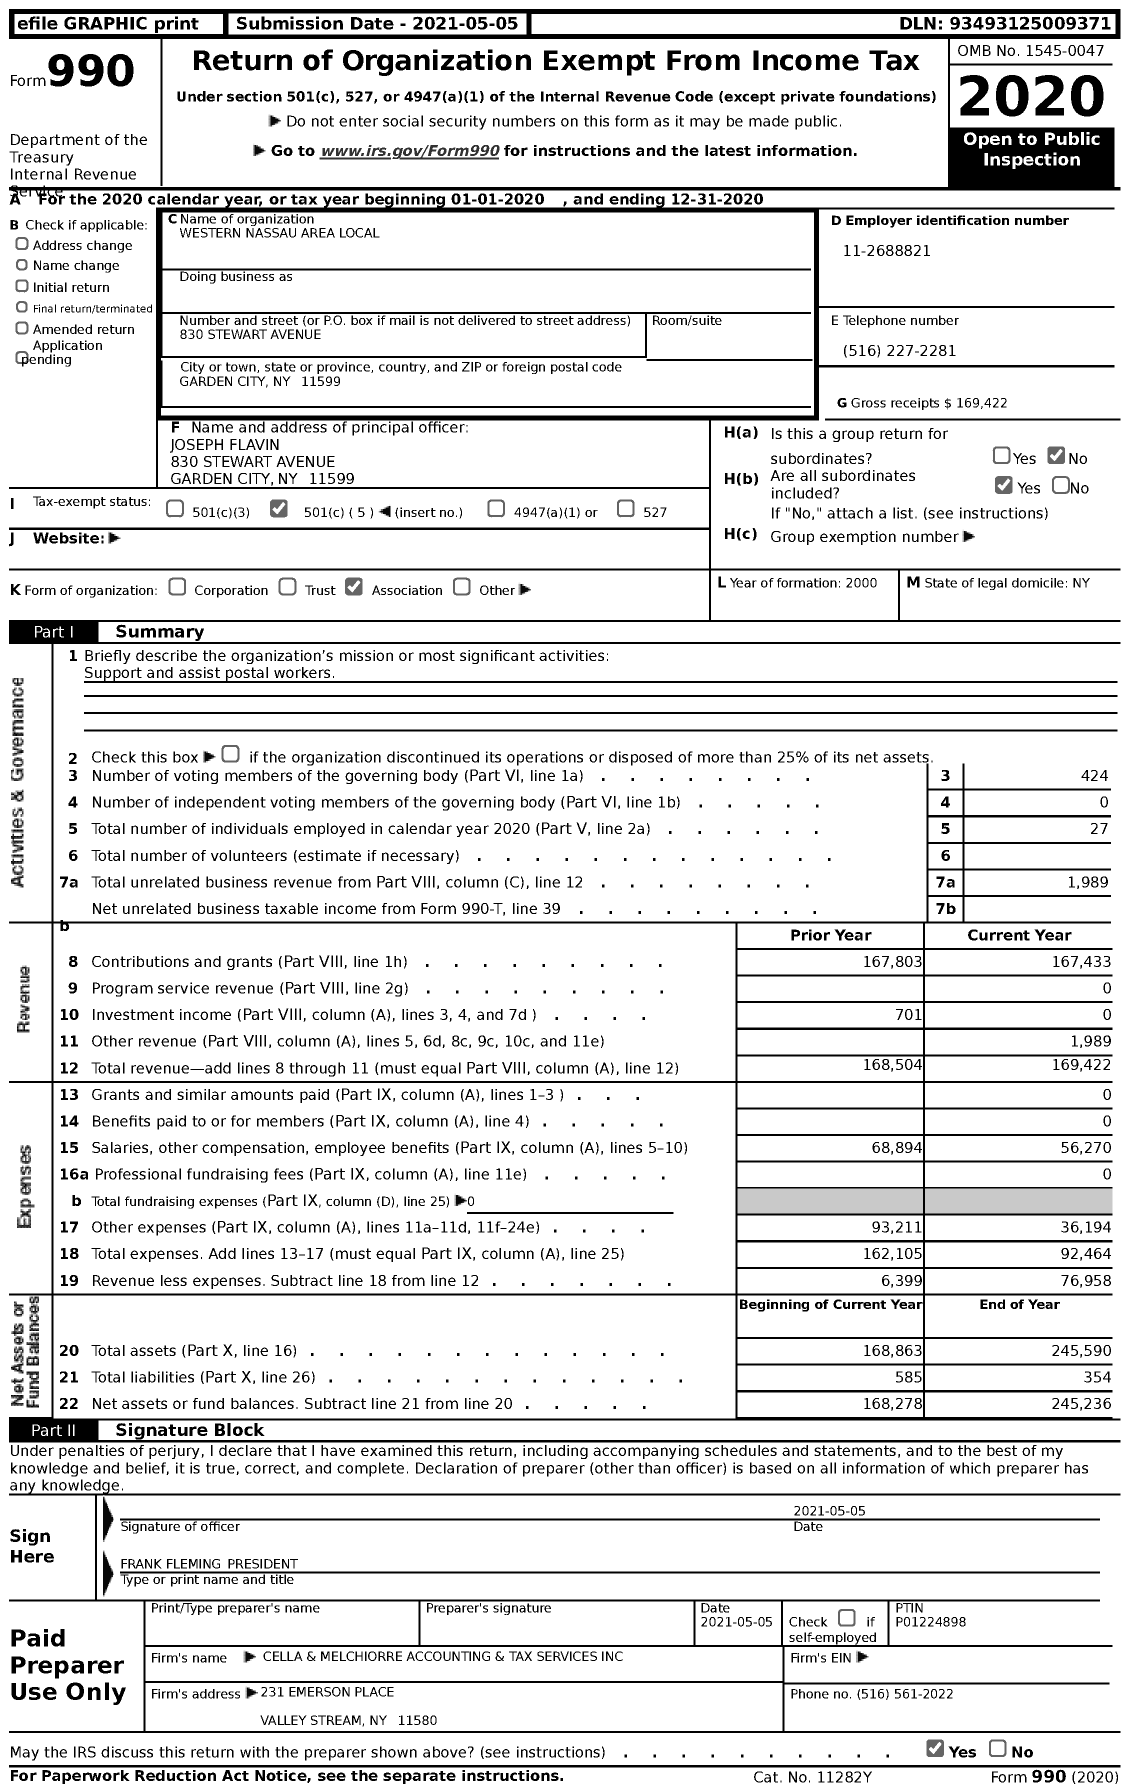 Image of first page of 2020 Form 990 for American Postal Workers Union - 7115 Western Nassau New York Area L